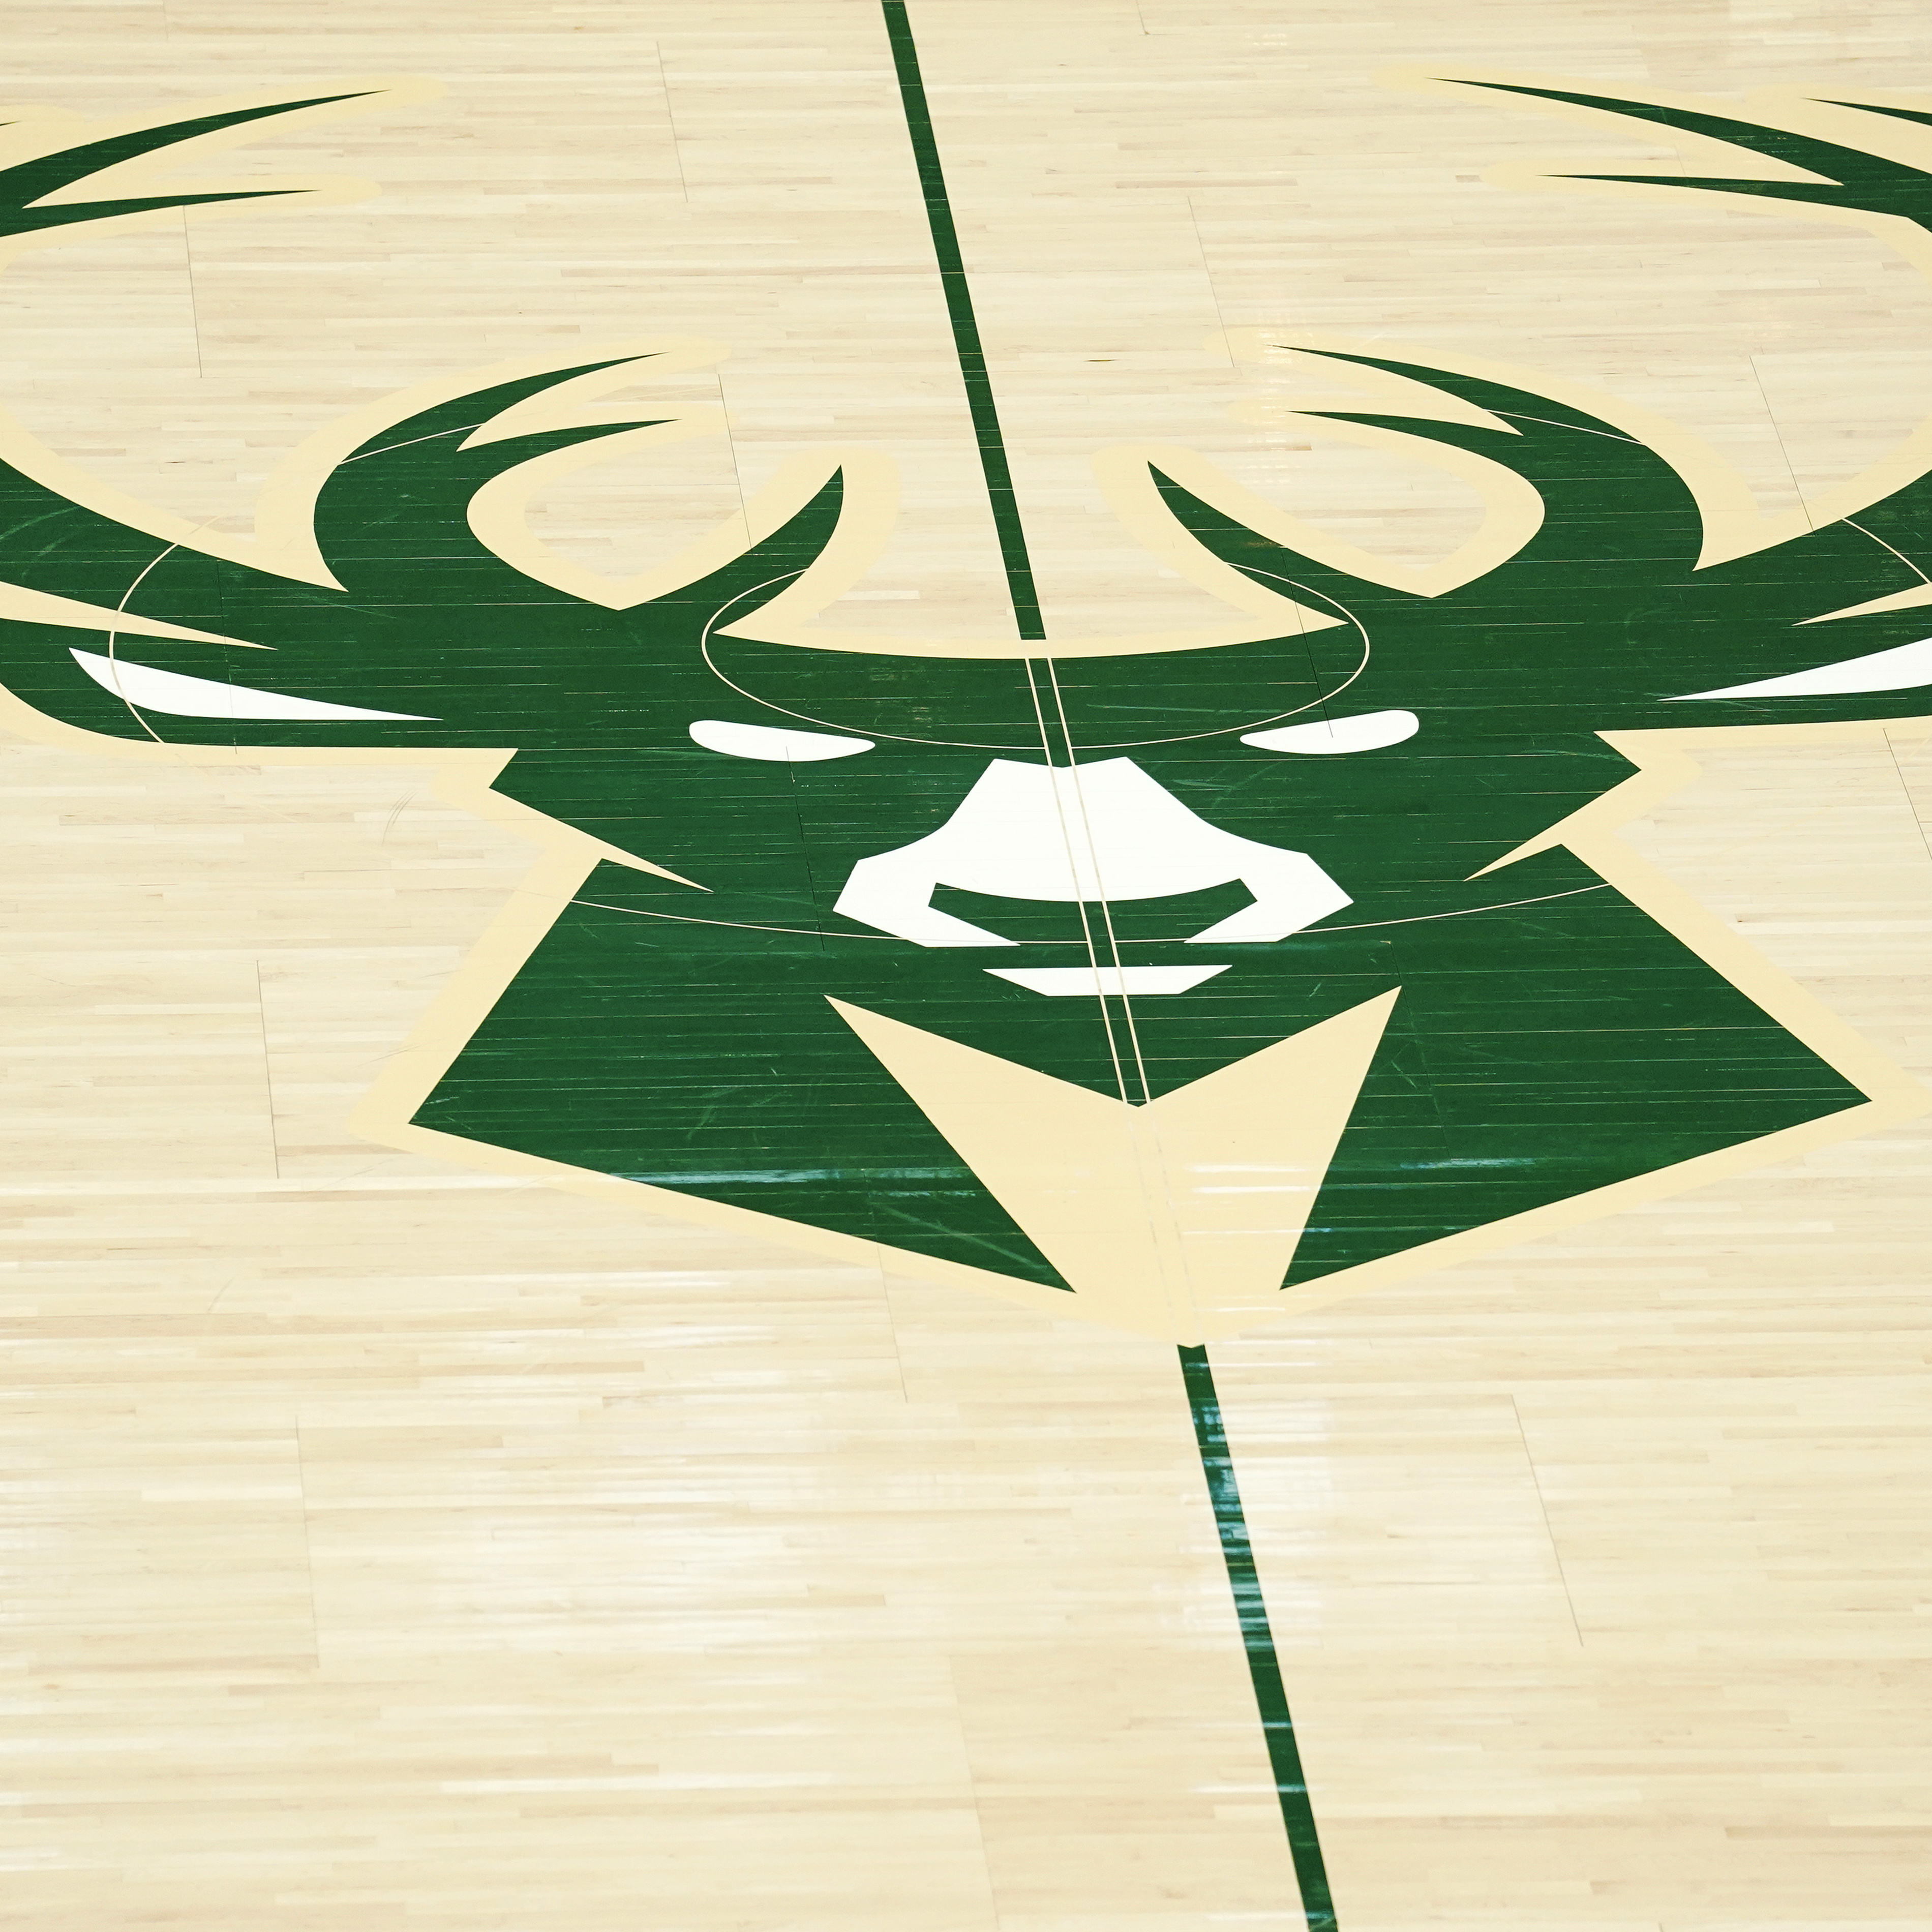 Bucks cancel Game 7 Watch Party after Shootings near Fiserv Forum's "Deer District" thumbnail